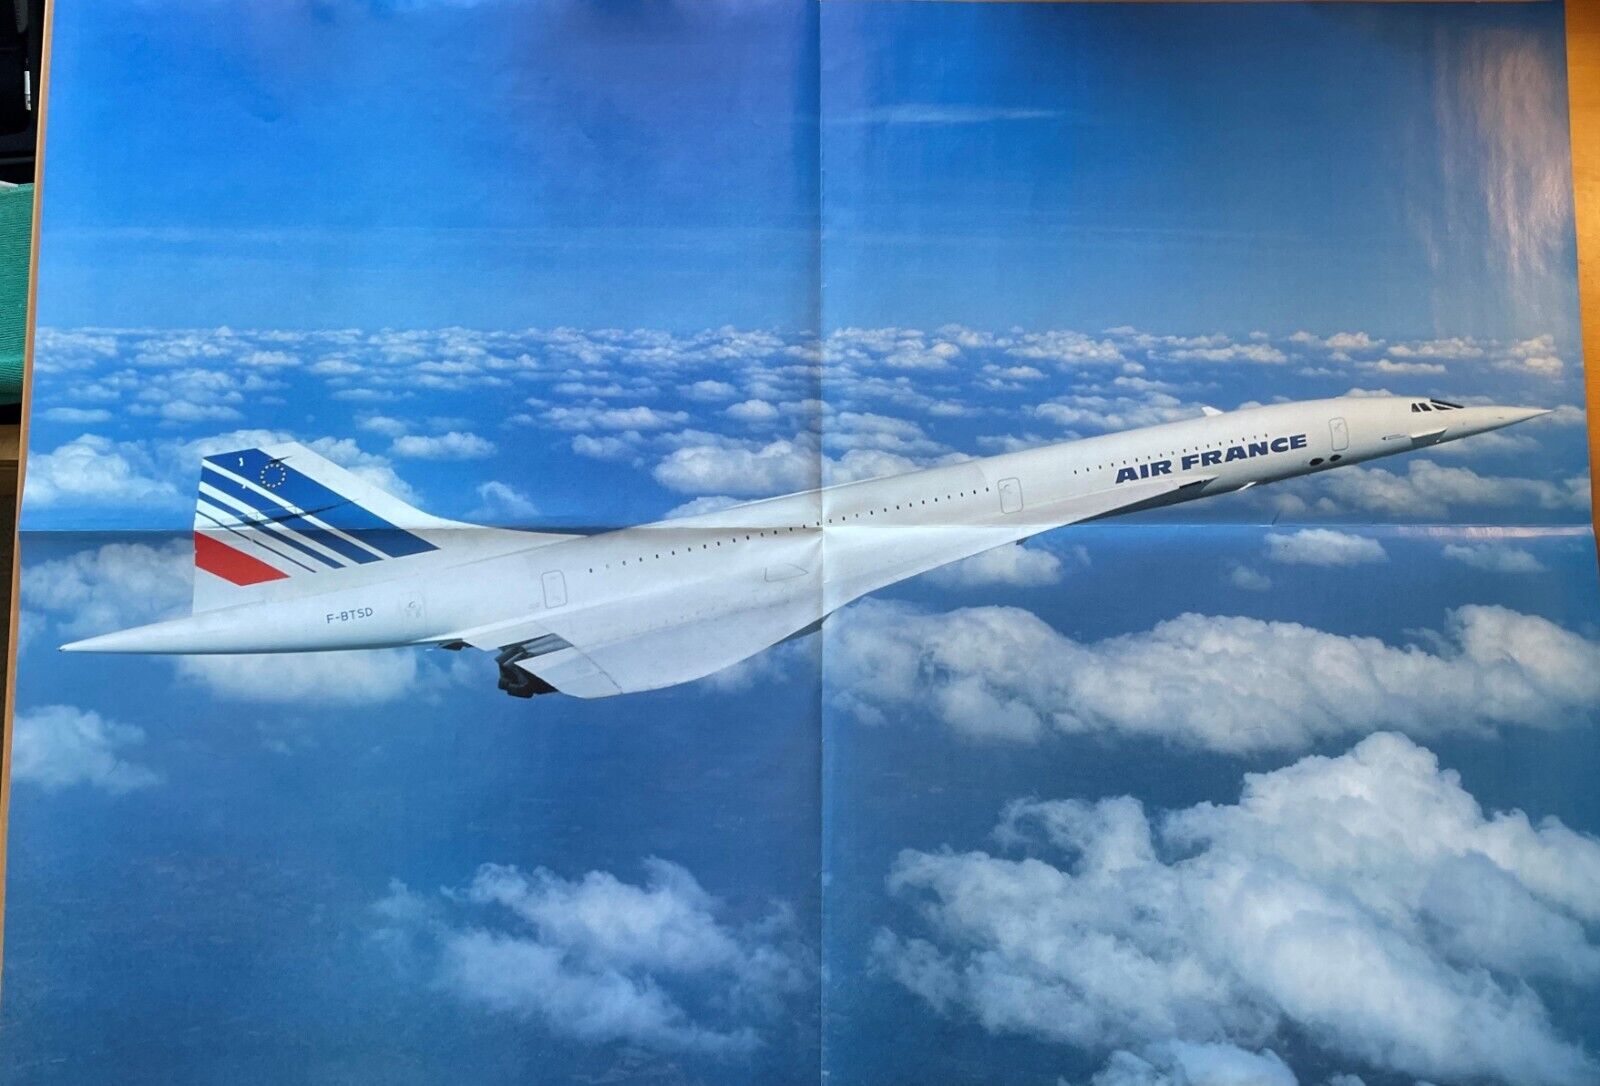 Air France, Concord, Vintage Poster 23 x 33, New